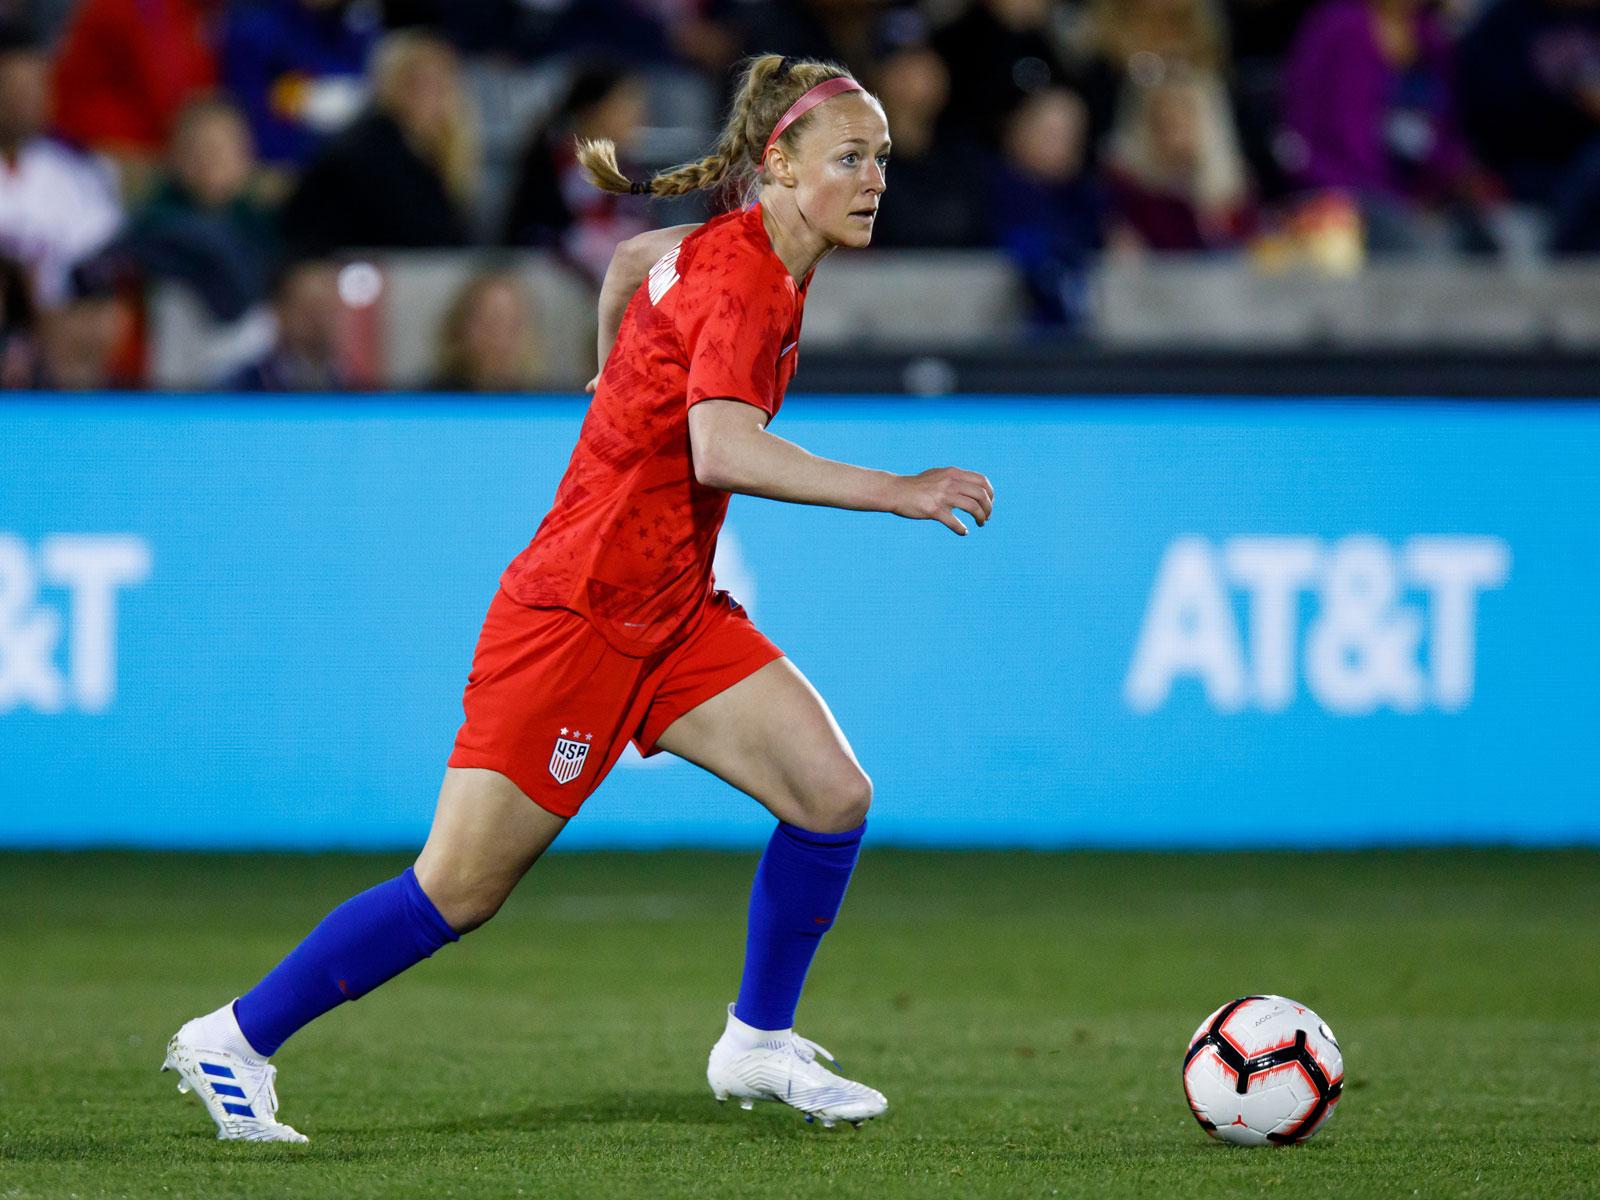 USWNT Women's World Cup roster projection: Final picks for 2019